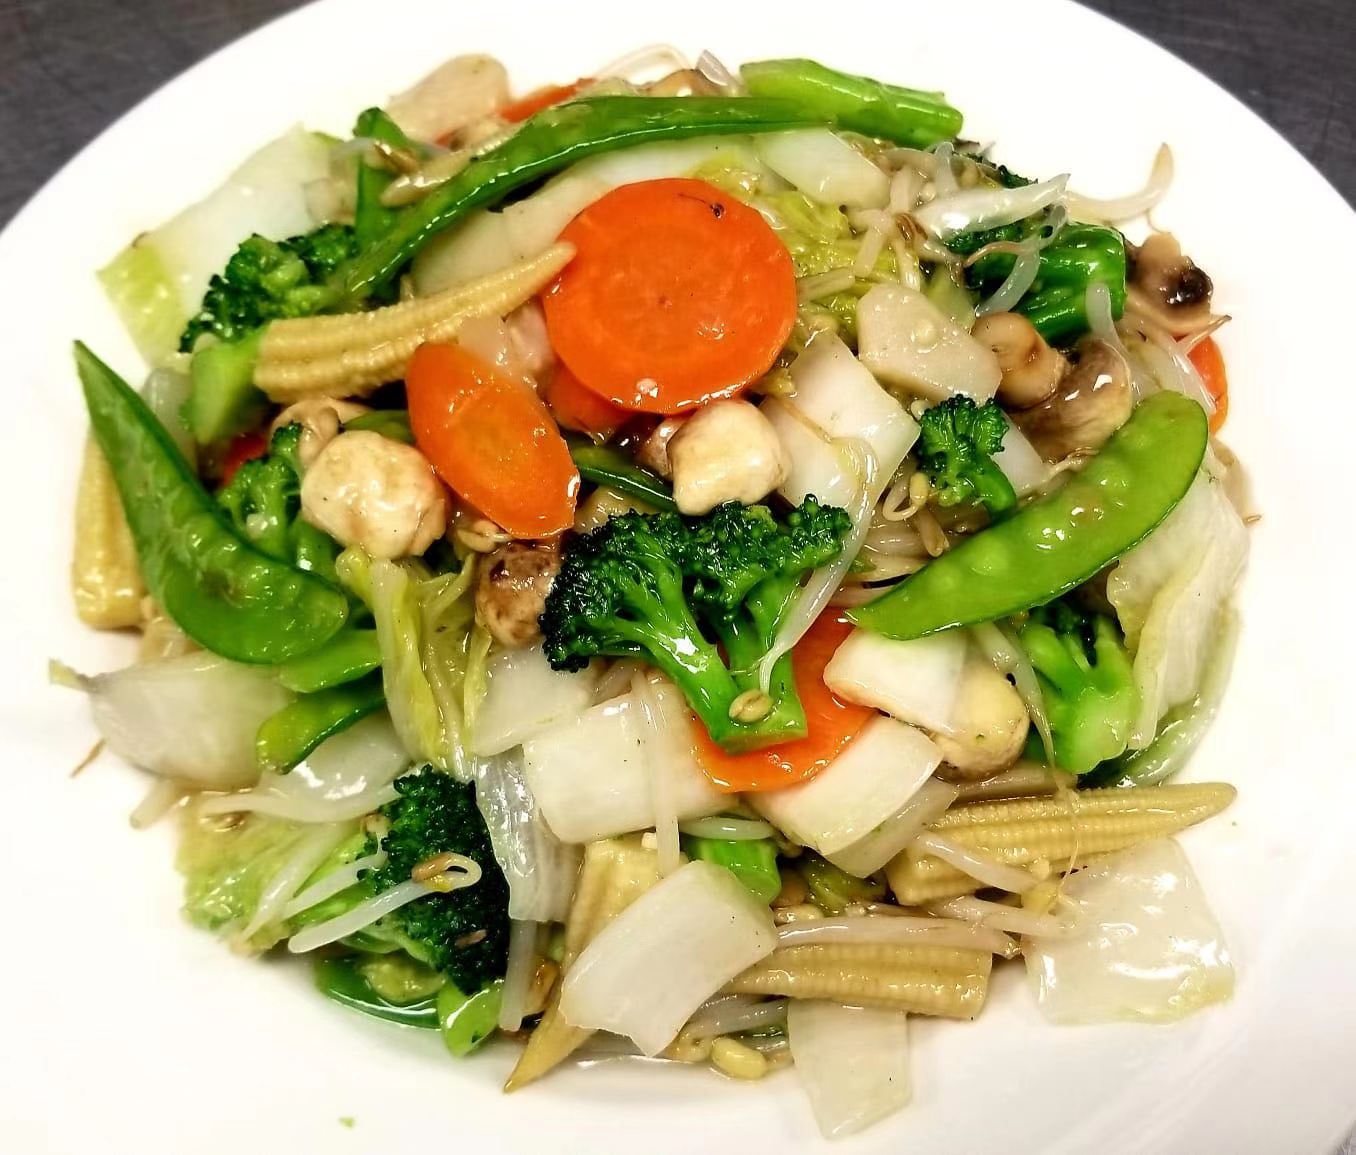 213. Chinese Mixed Vegetables